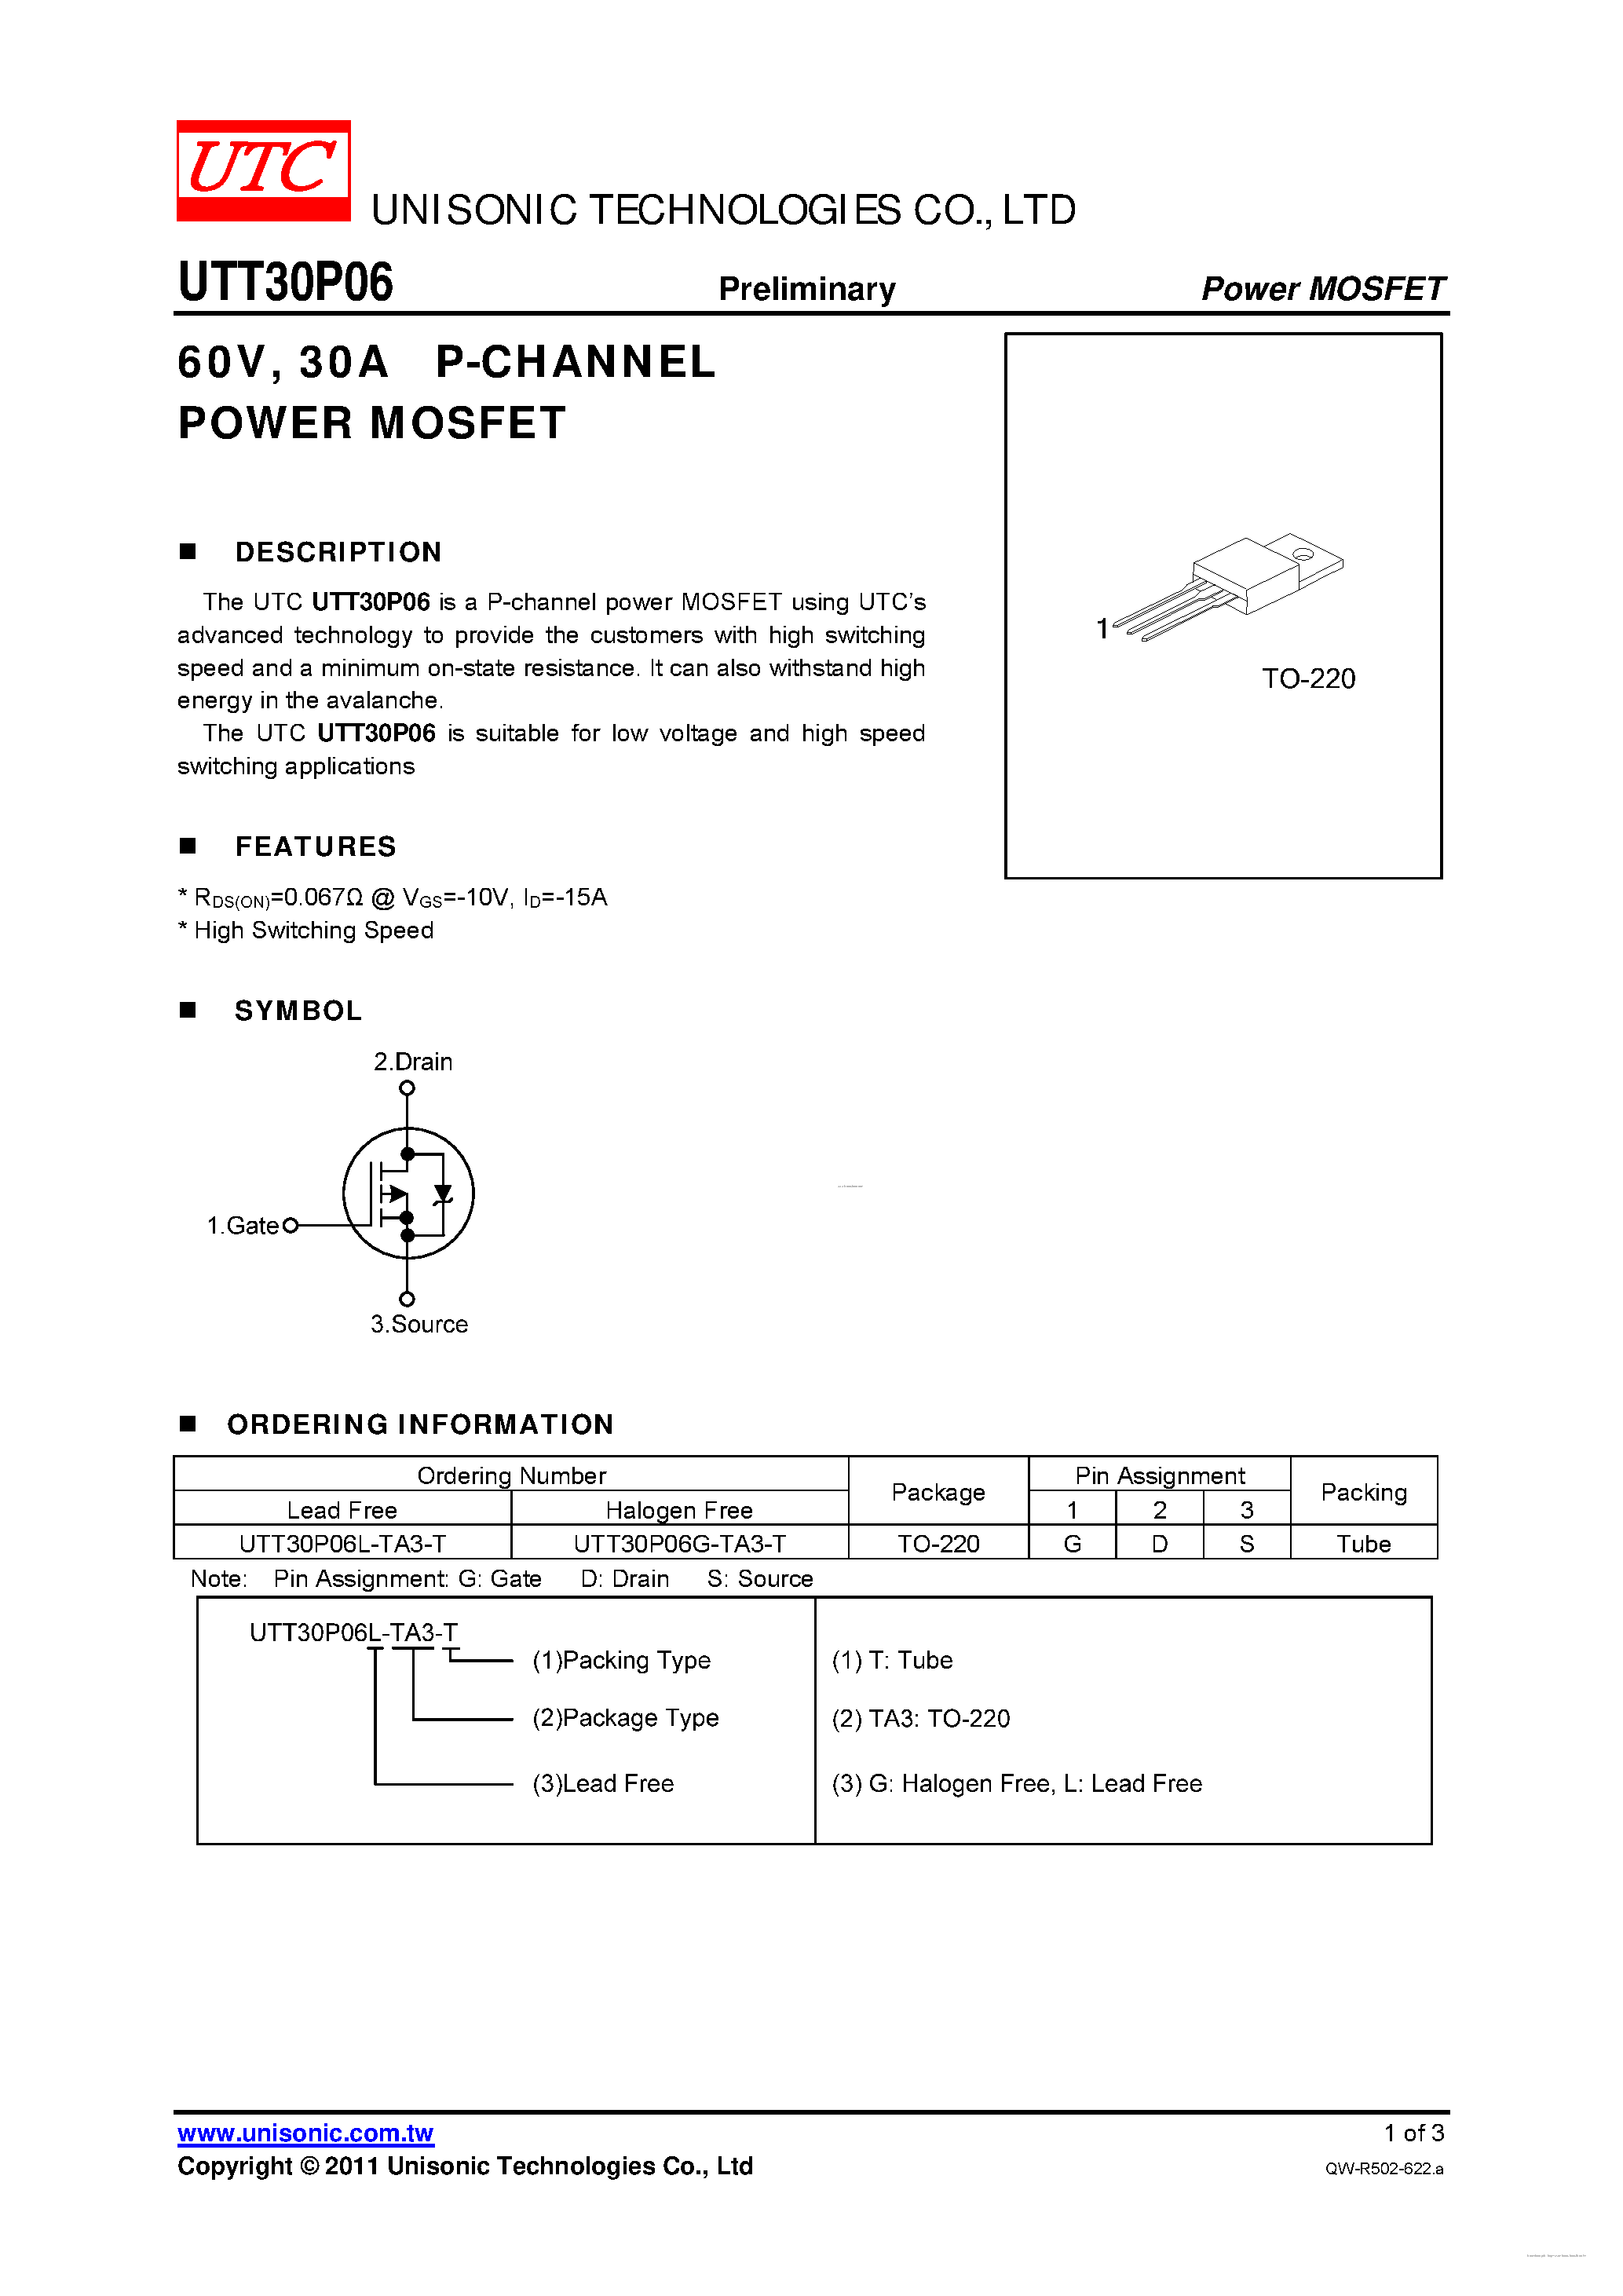 Datasheet UTT30P06 - P-CHANNEL POWER MOSFET page 1